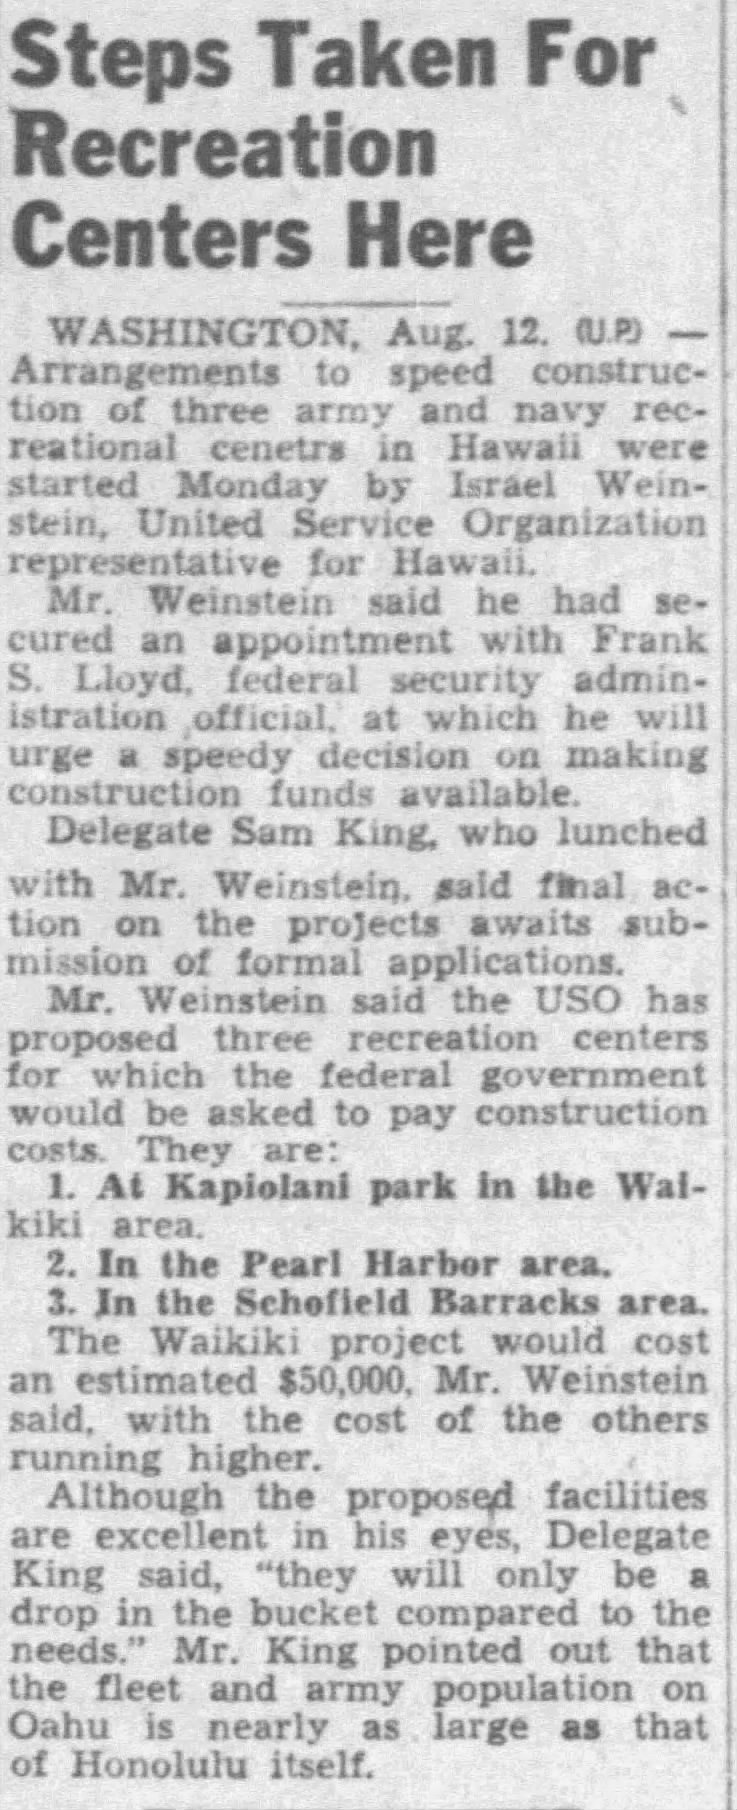 Plans for 3 centers in Hawaii - Aug 12 1941